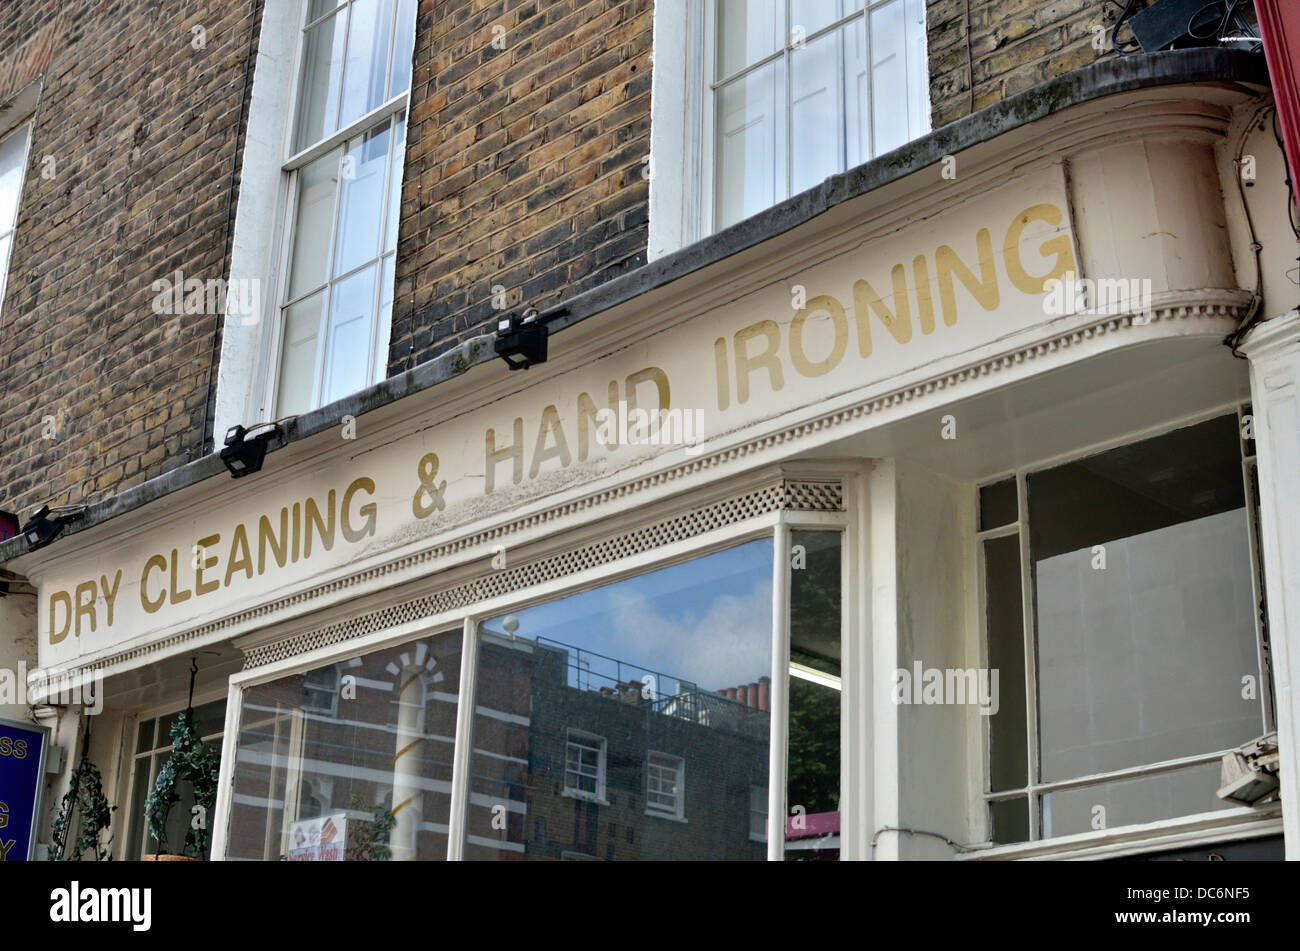 Dry cleaning and hand ironing shop, London, UK Stock Photo